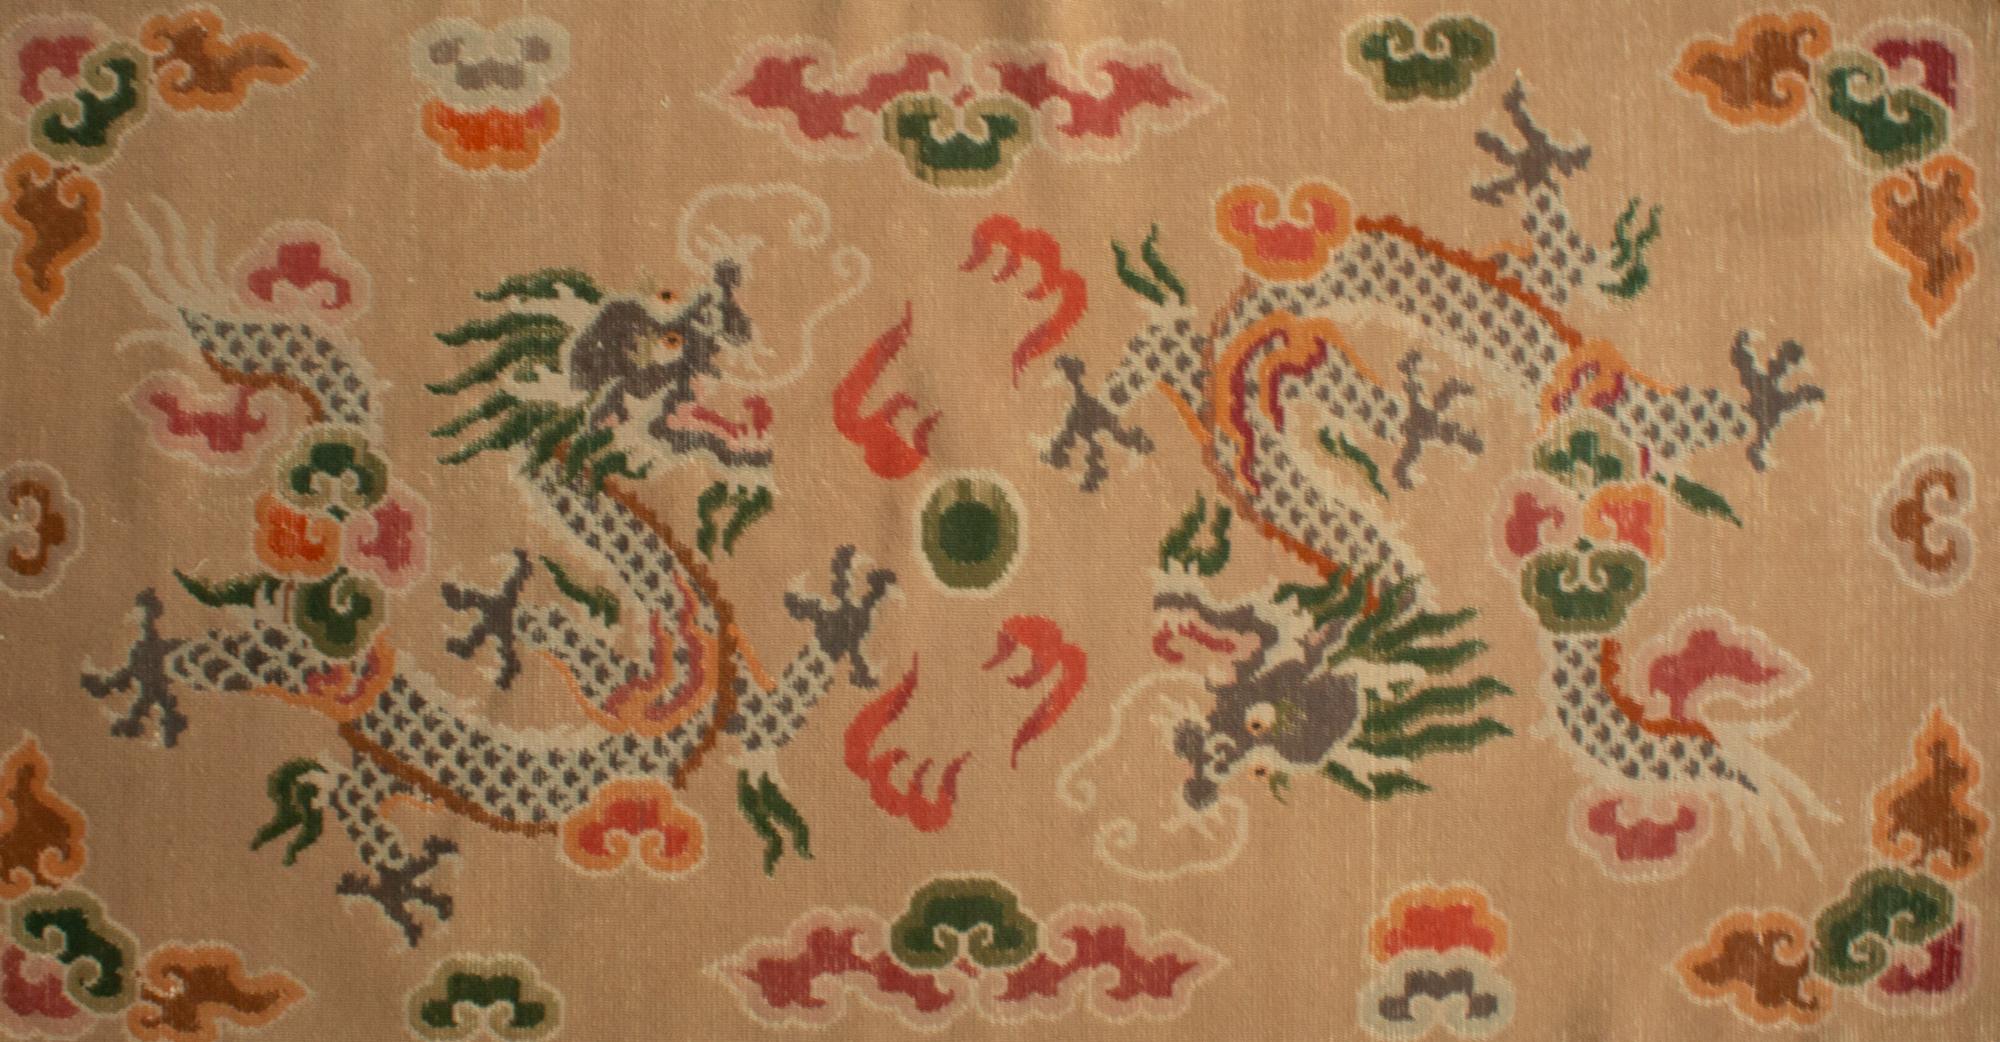 Hand-Woven Sitting and Sleeping Tibetan Khaden Rug with Dragon and Cloud Motifs in Wool